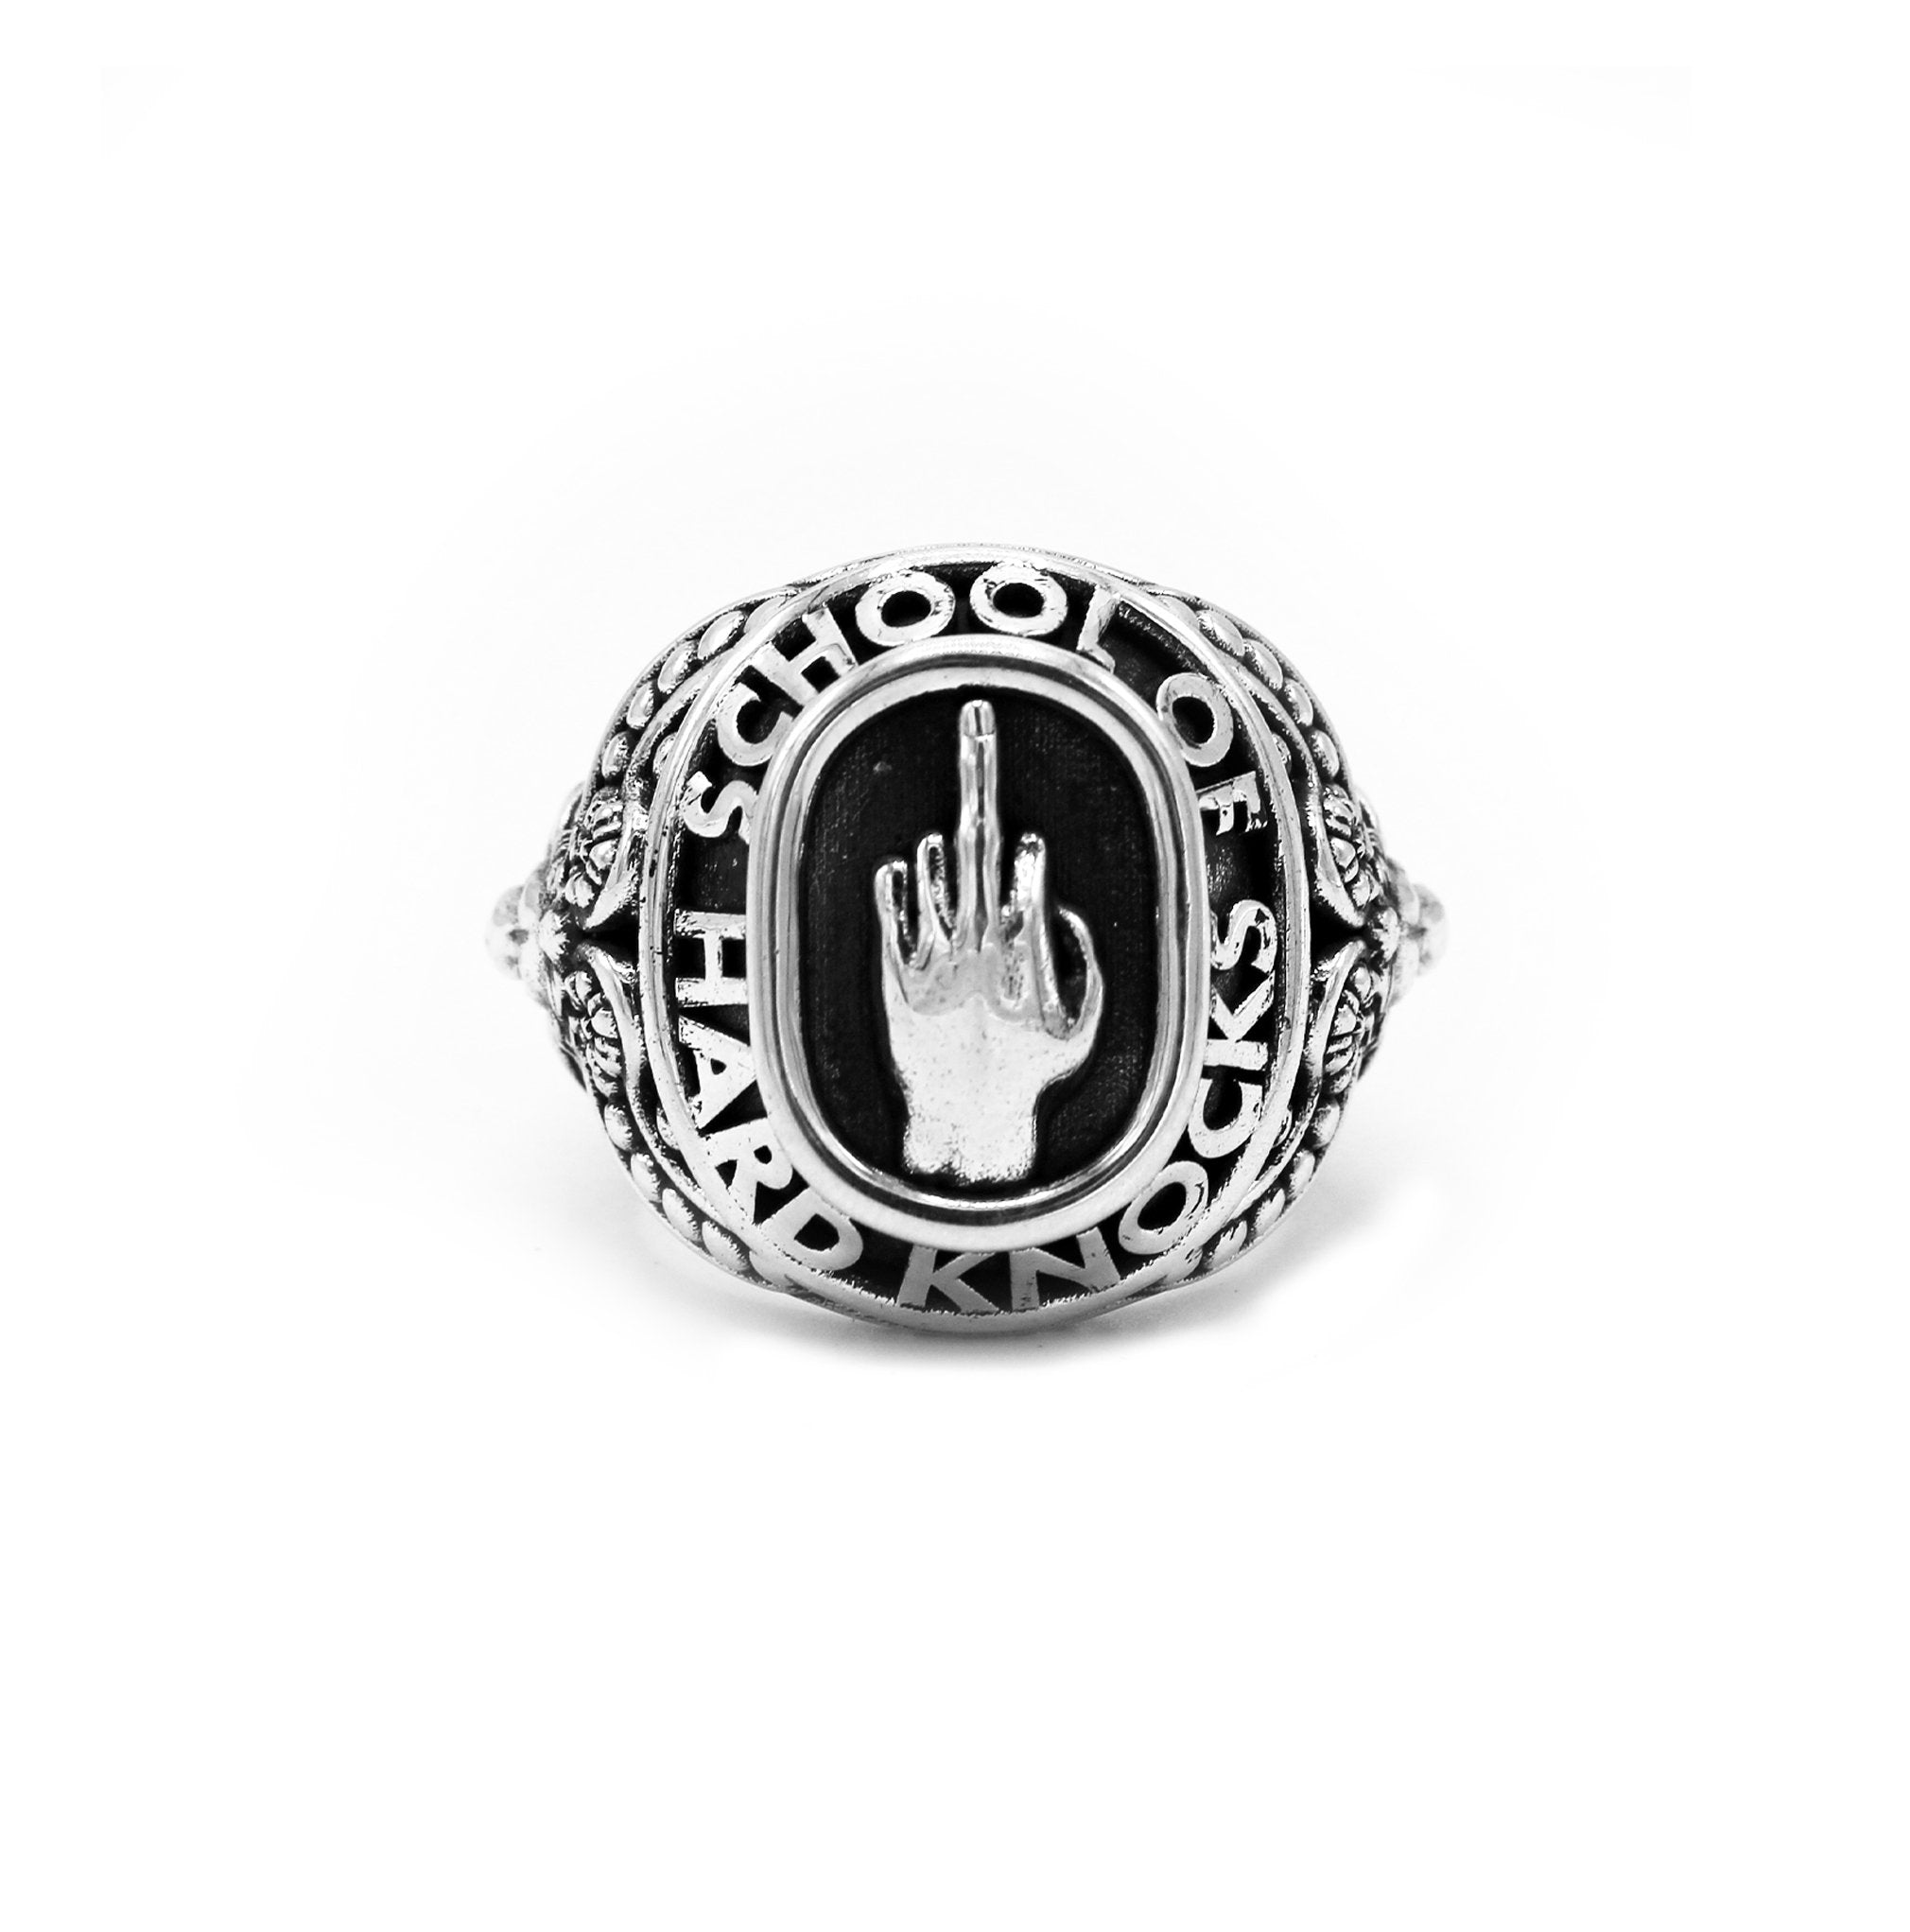 School of hard knocks class ring, middle finger class ring